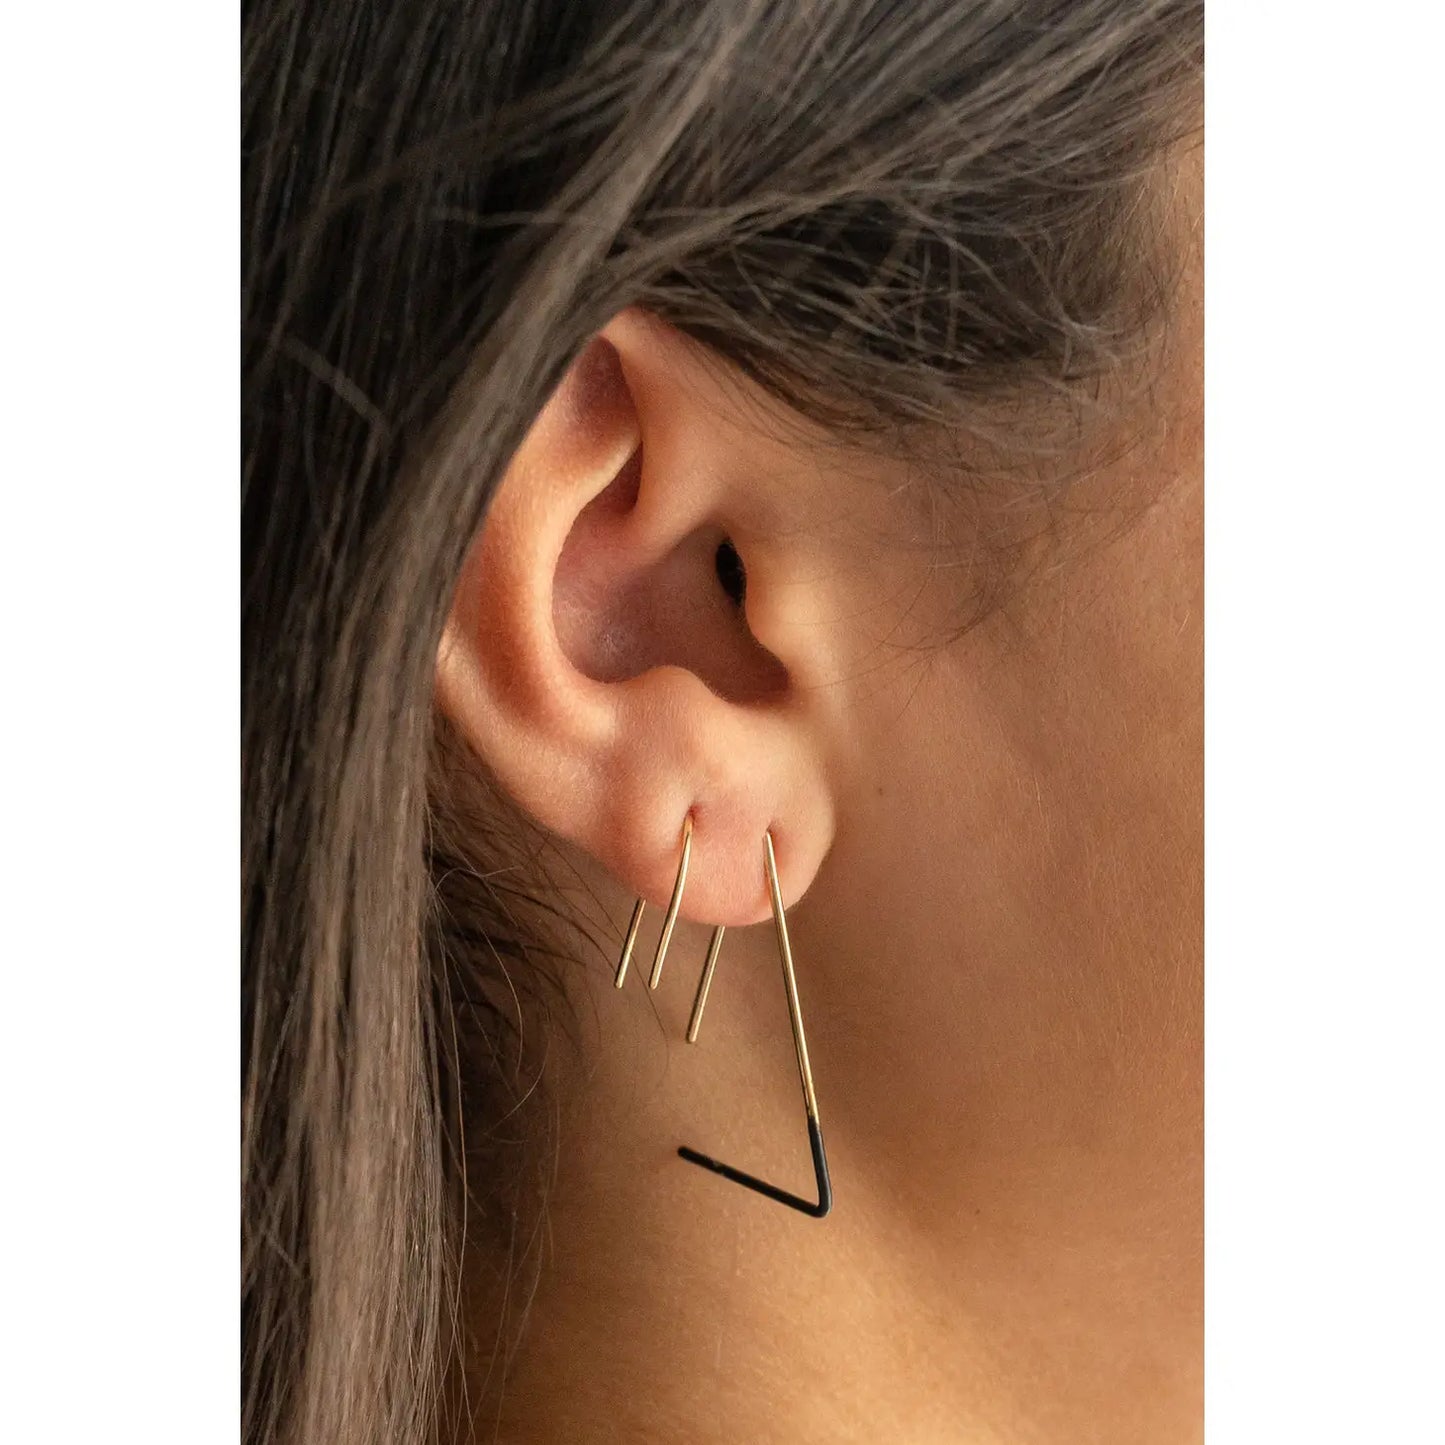 Long Paperclip Earrings - Gold or Silver